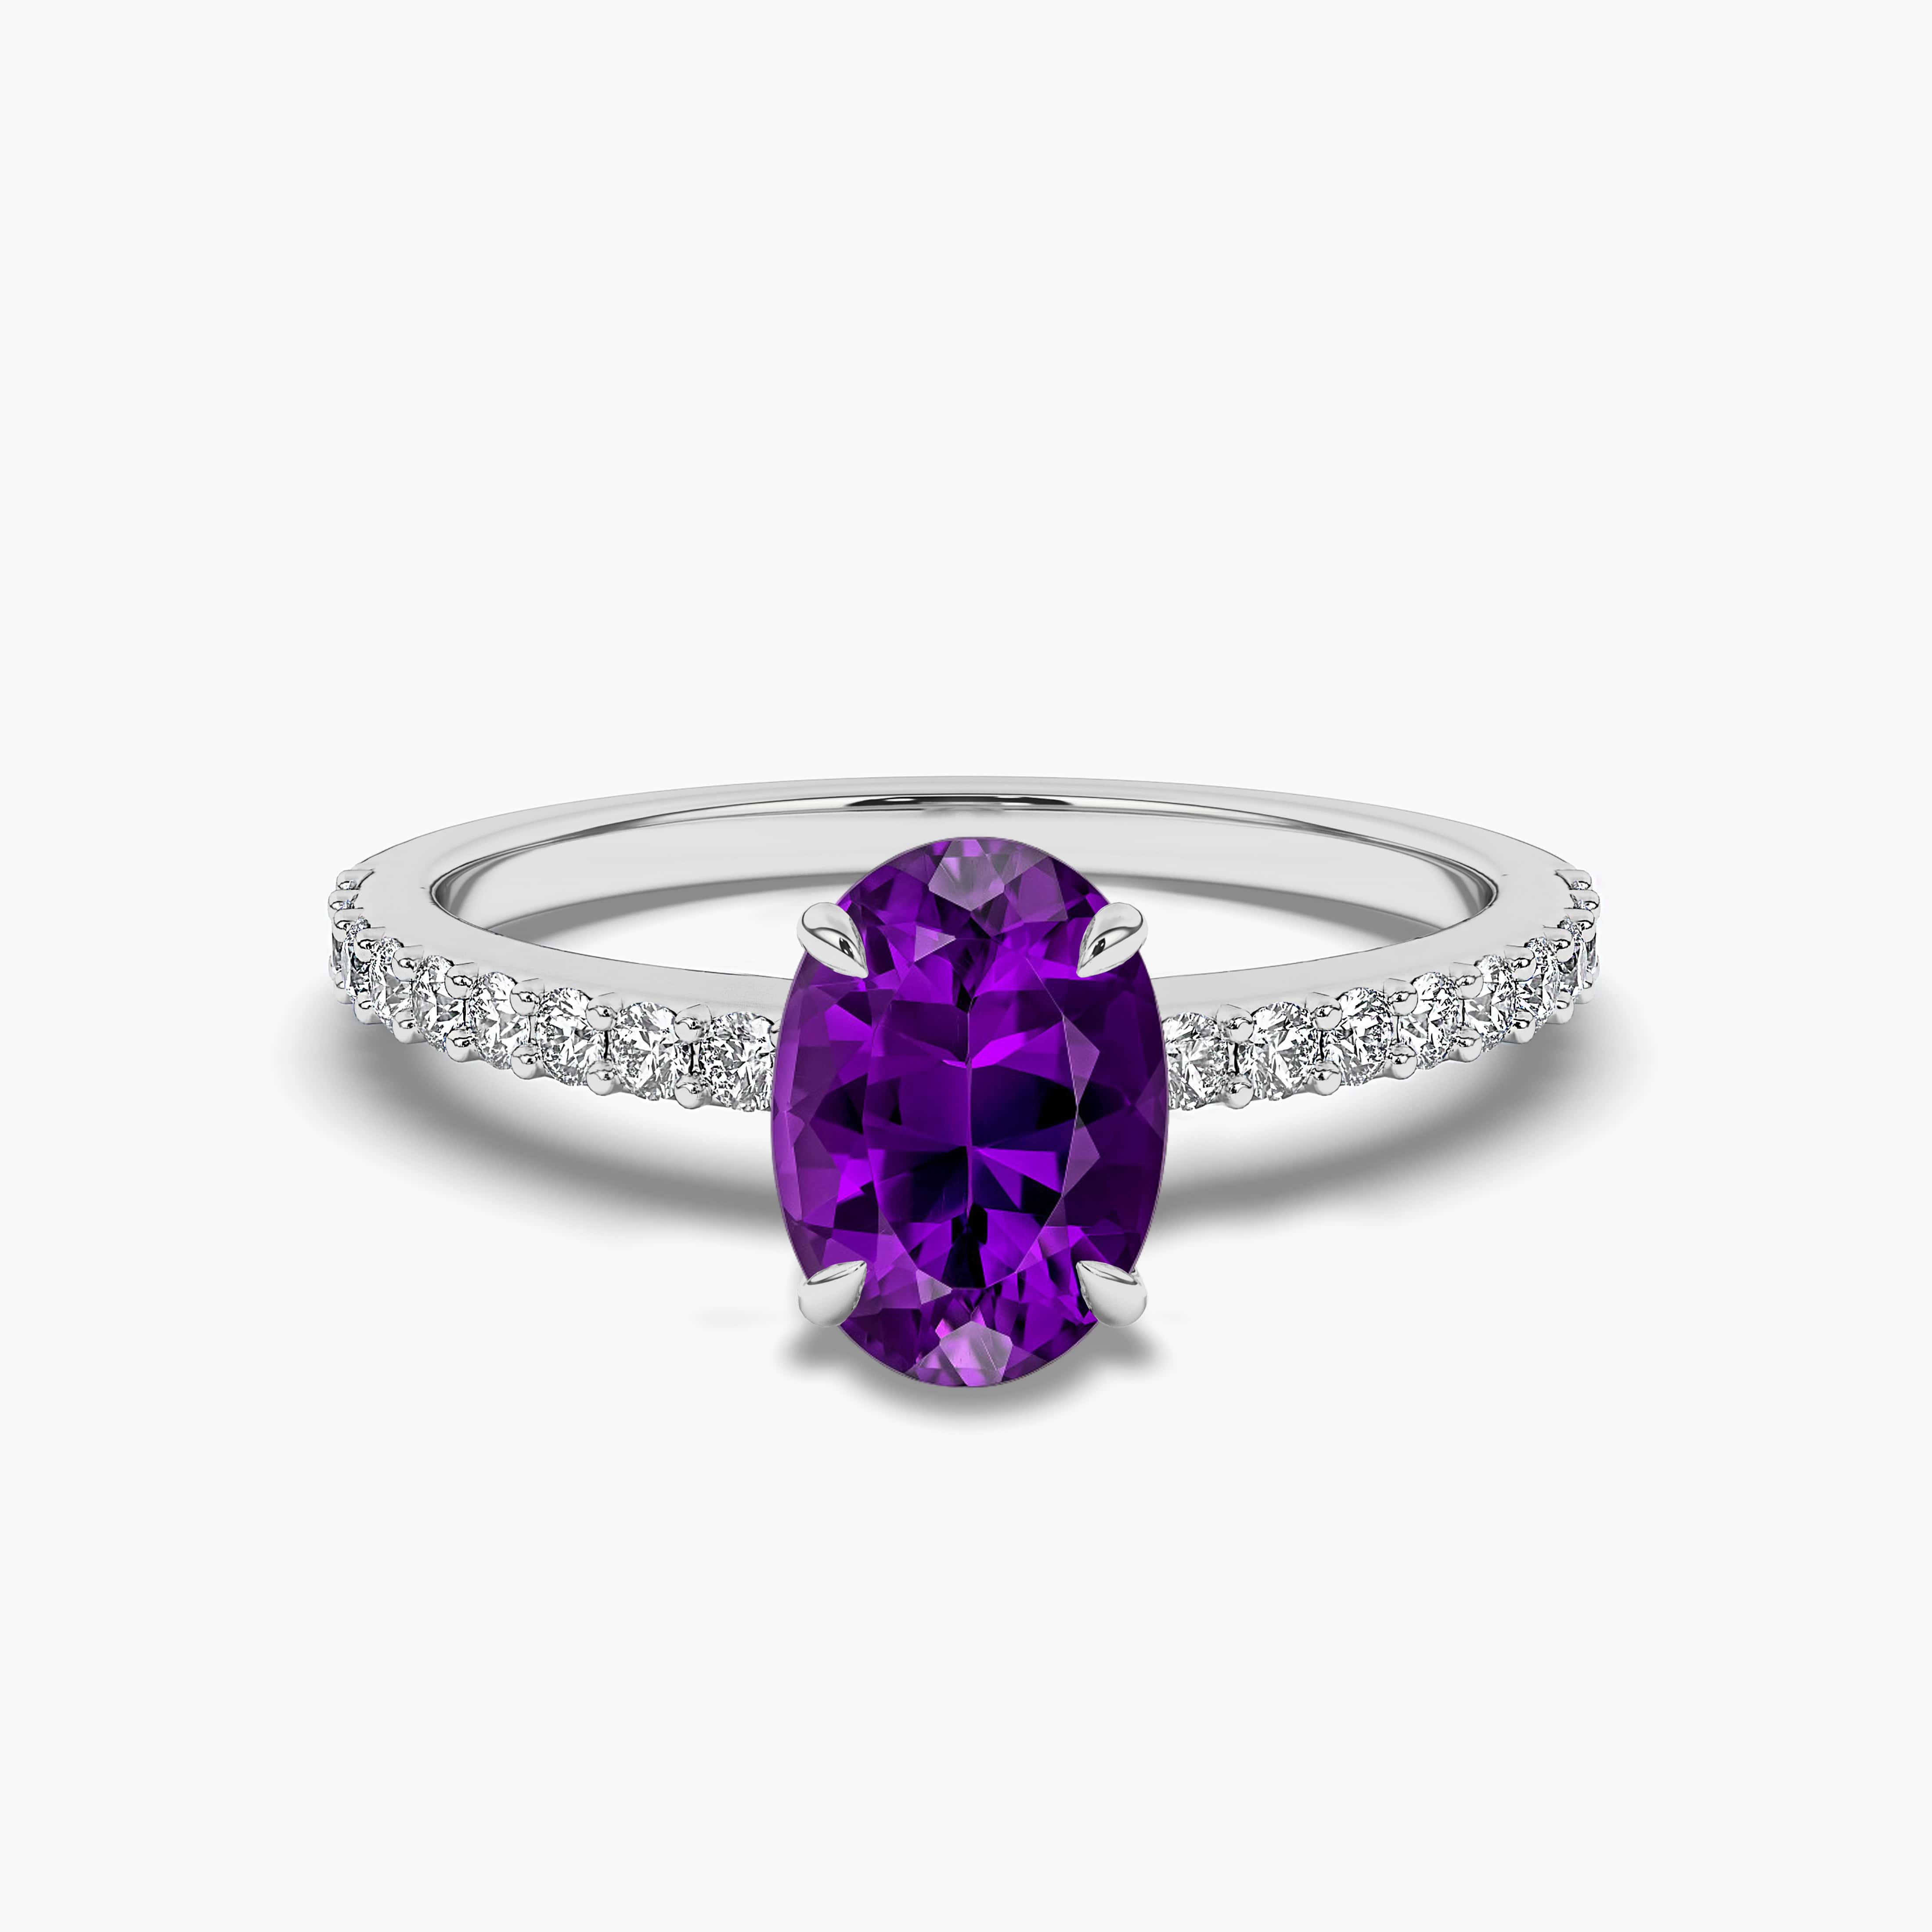 Oval Cut Amethyst Ring With Diamond White Gold For Woman's